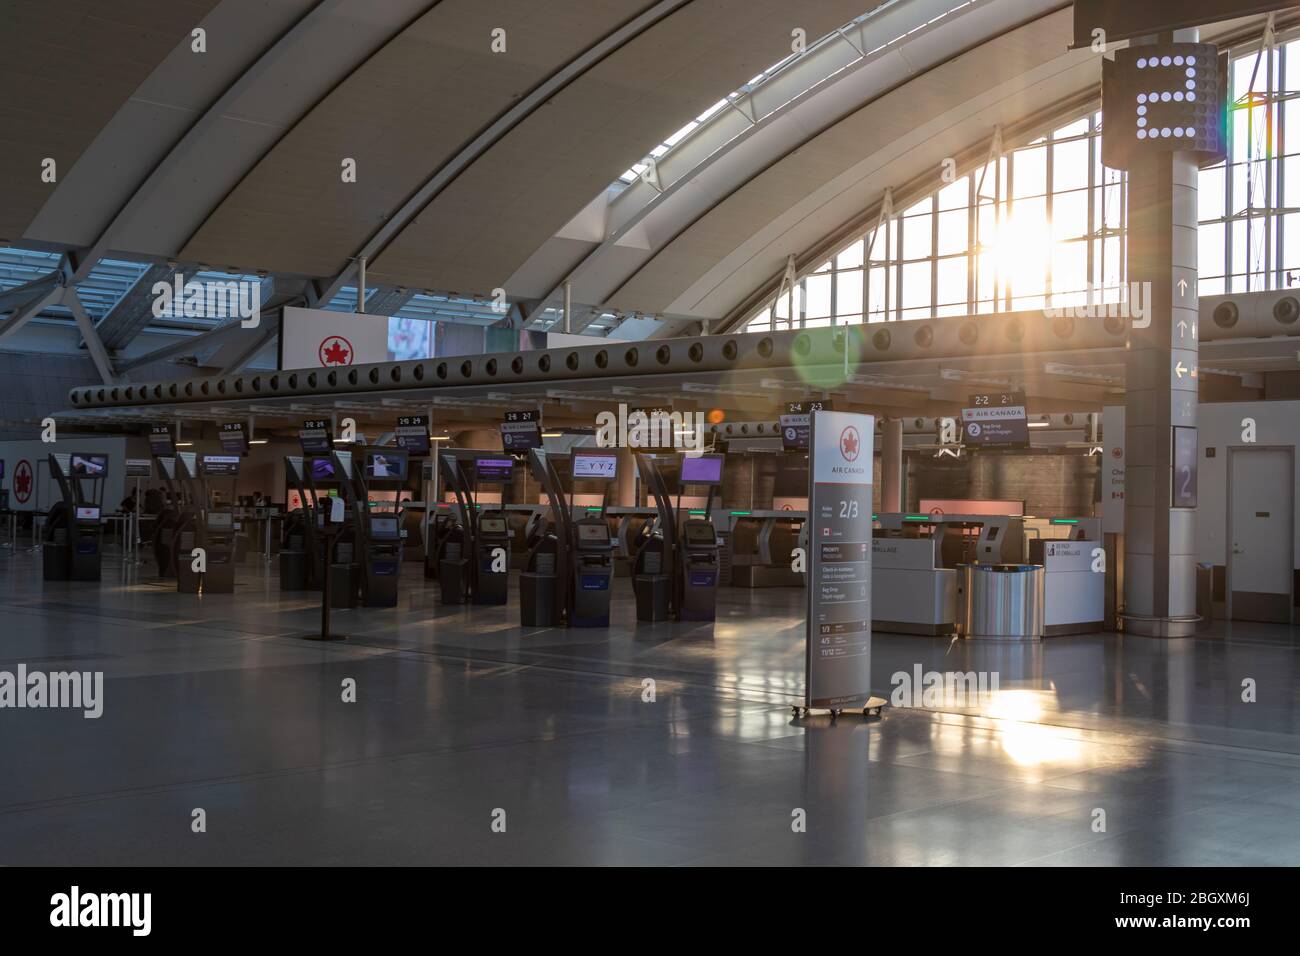 Sun shining into￼ a vacant￼ Air Canada check-in area inside Terminal 1 at Toronto Pearson Intl. Airport during the COVID-19 pandemic. Stock Photo